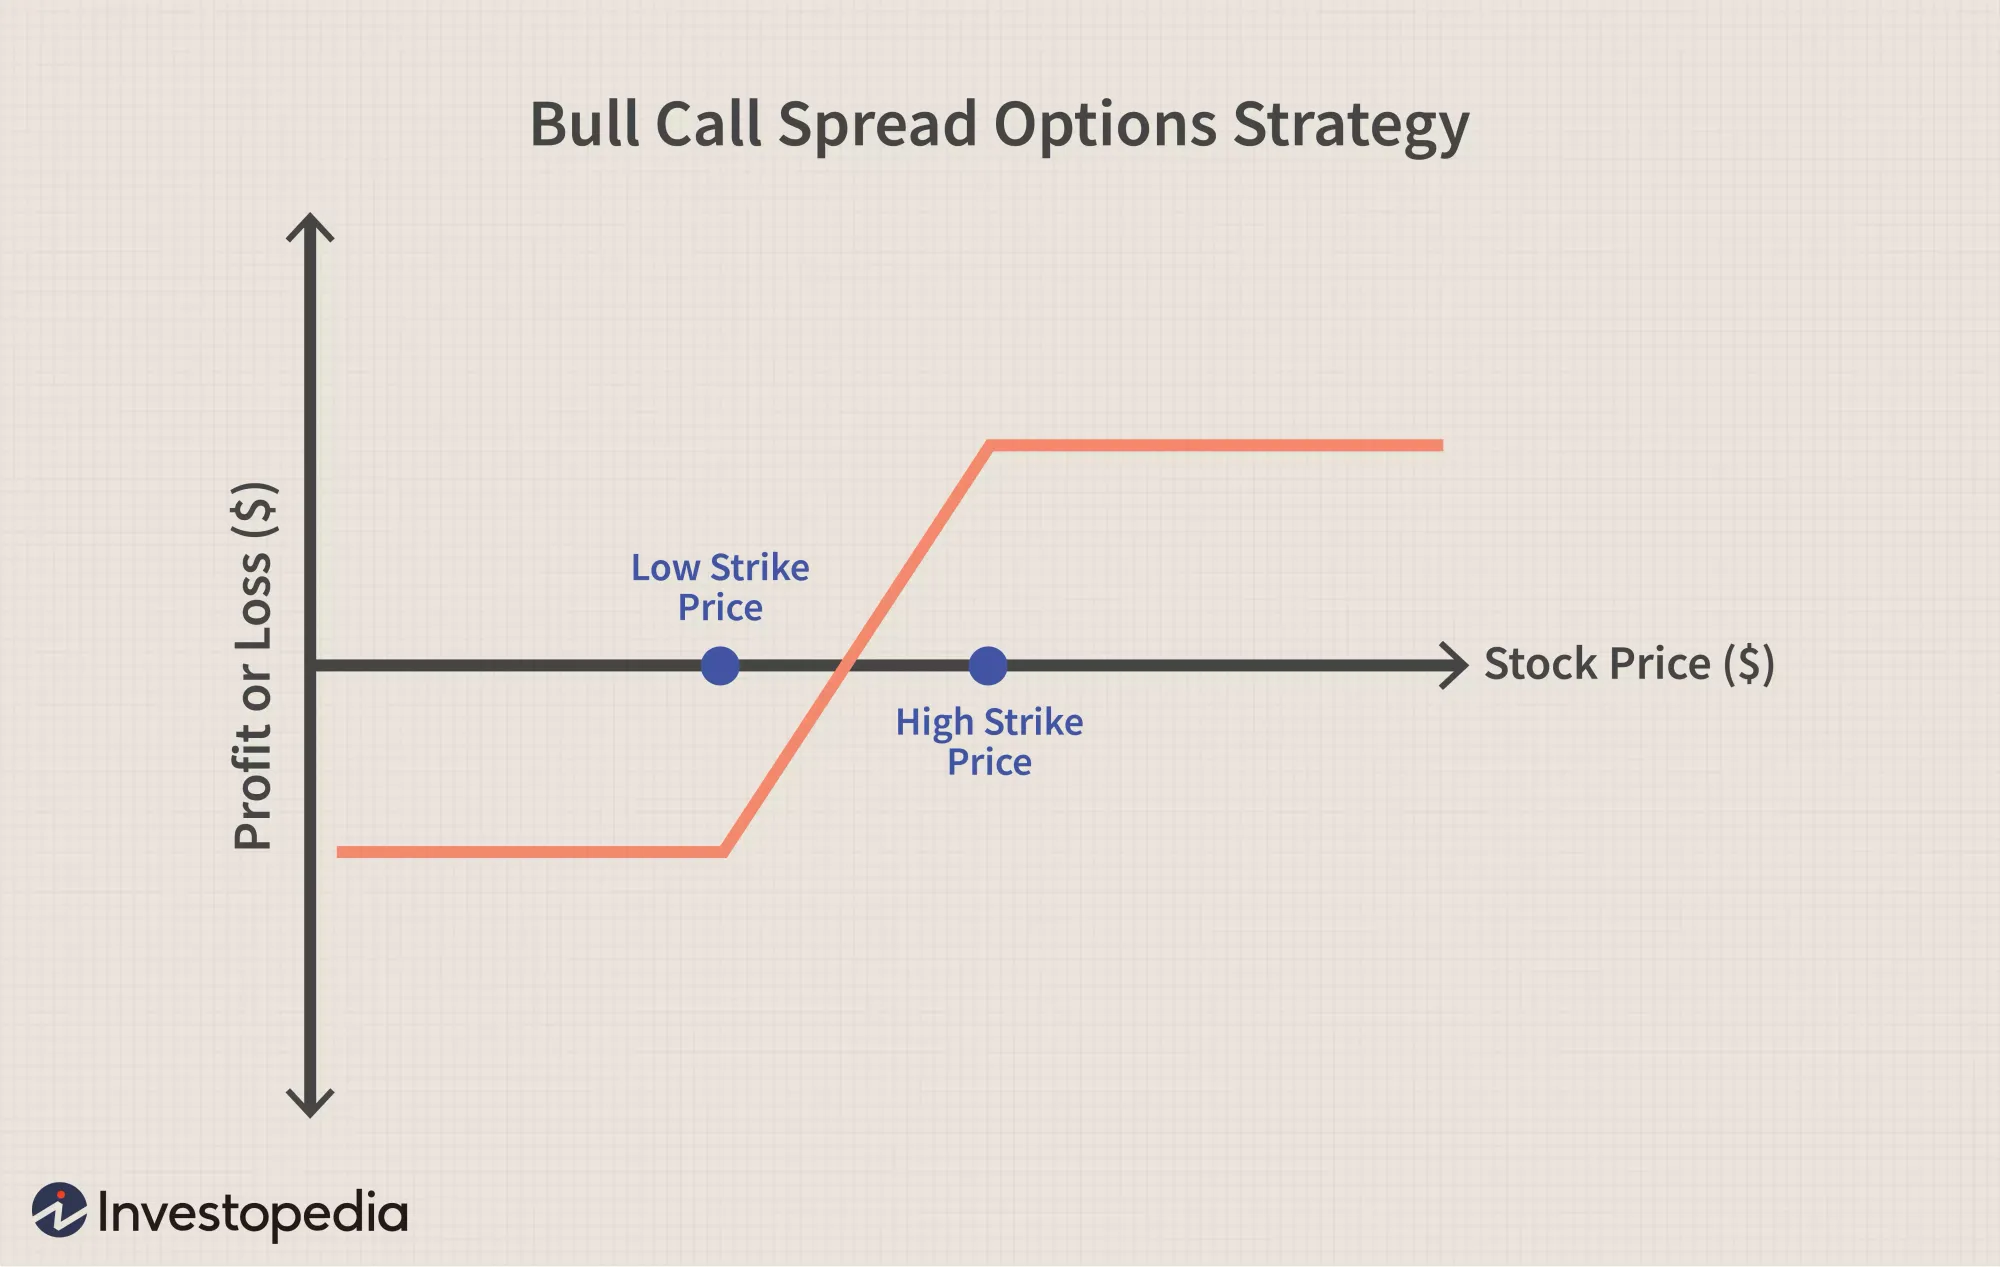 Bull Call Spread Options Strategy